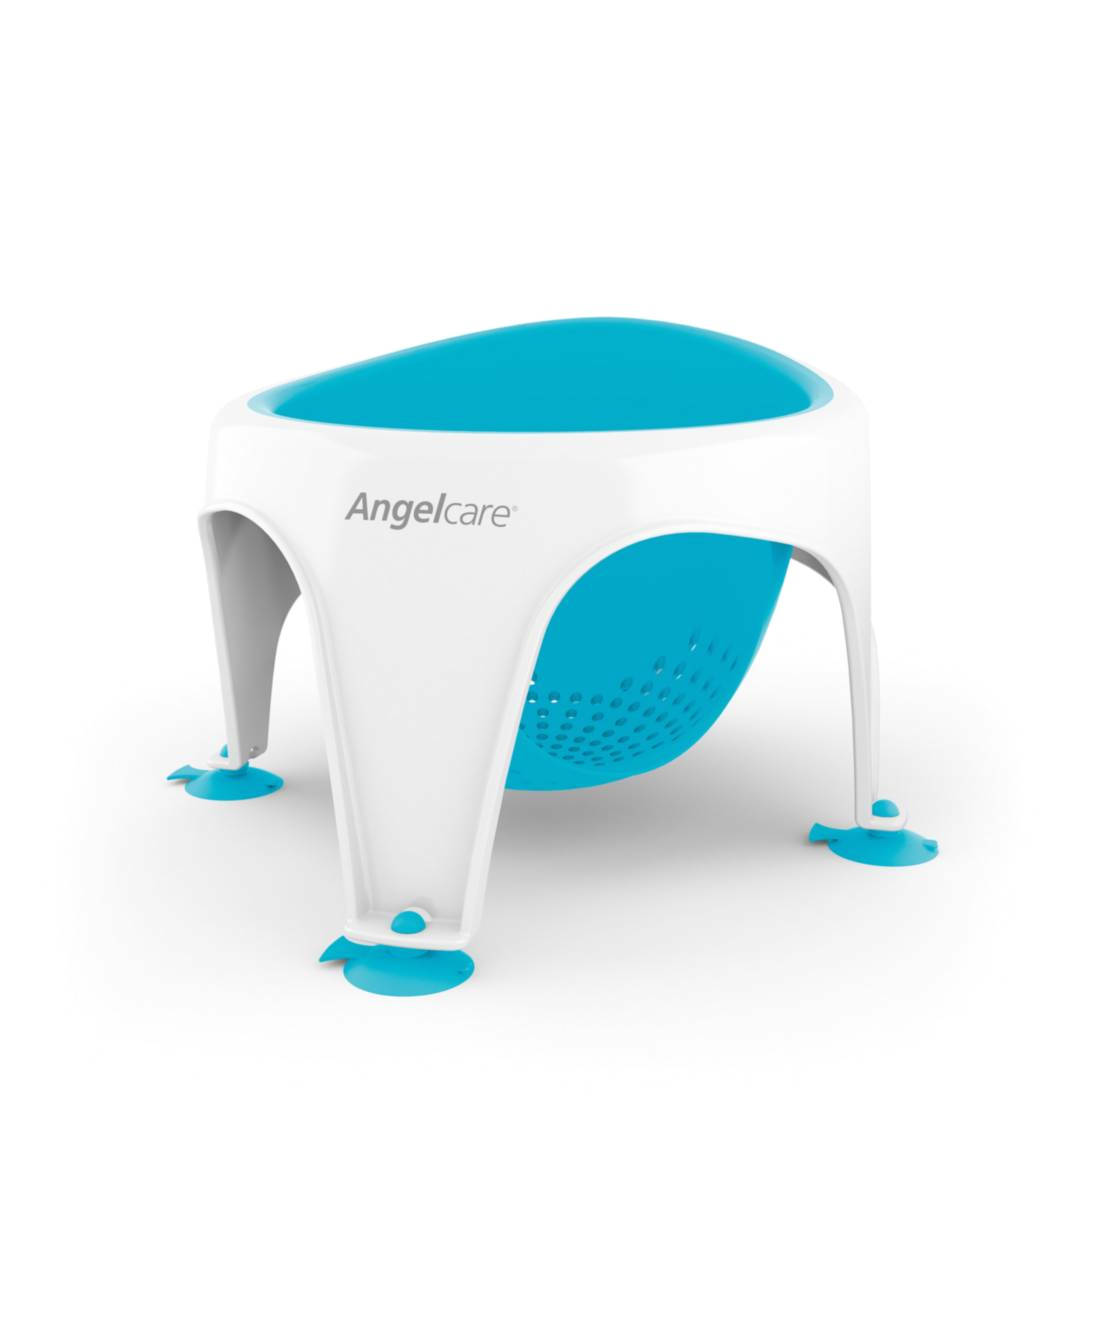 Baby Bath Seat Angelcare Angelcare soft touch Bath Set Blue